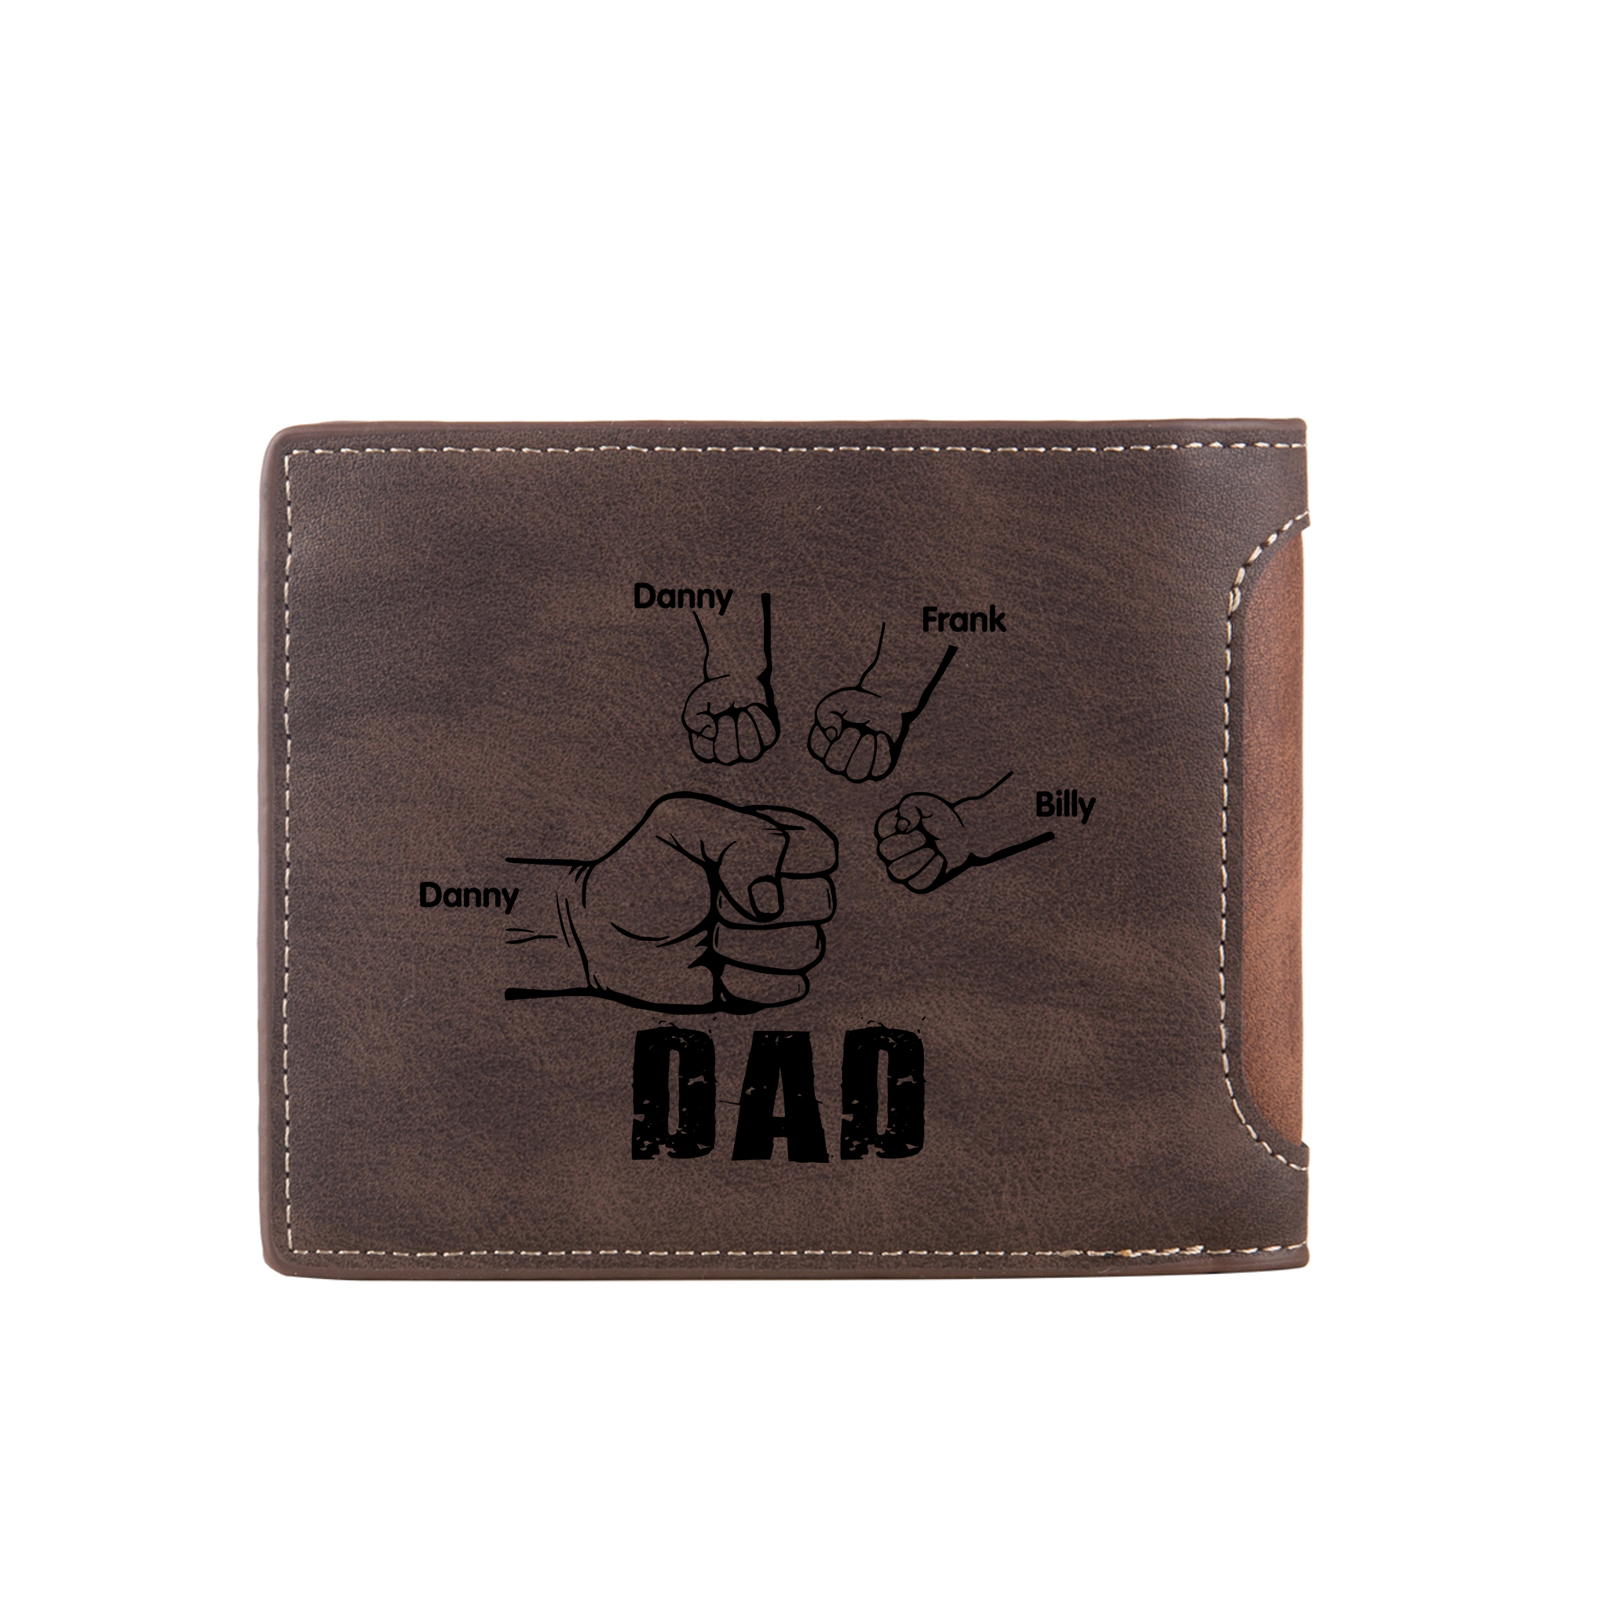 4 Names - Personalized Photo Custom Leather Men's Folding Wallet as a Father's Day Gift for Dad